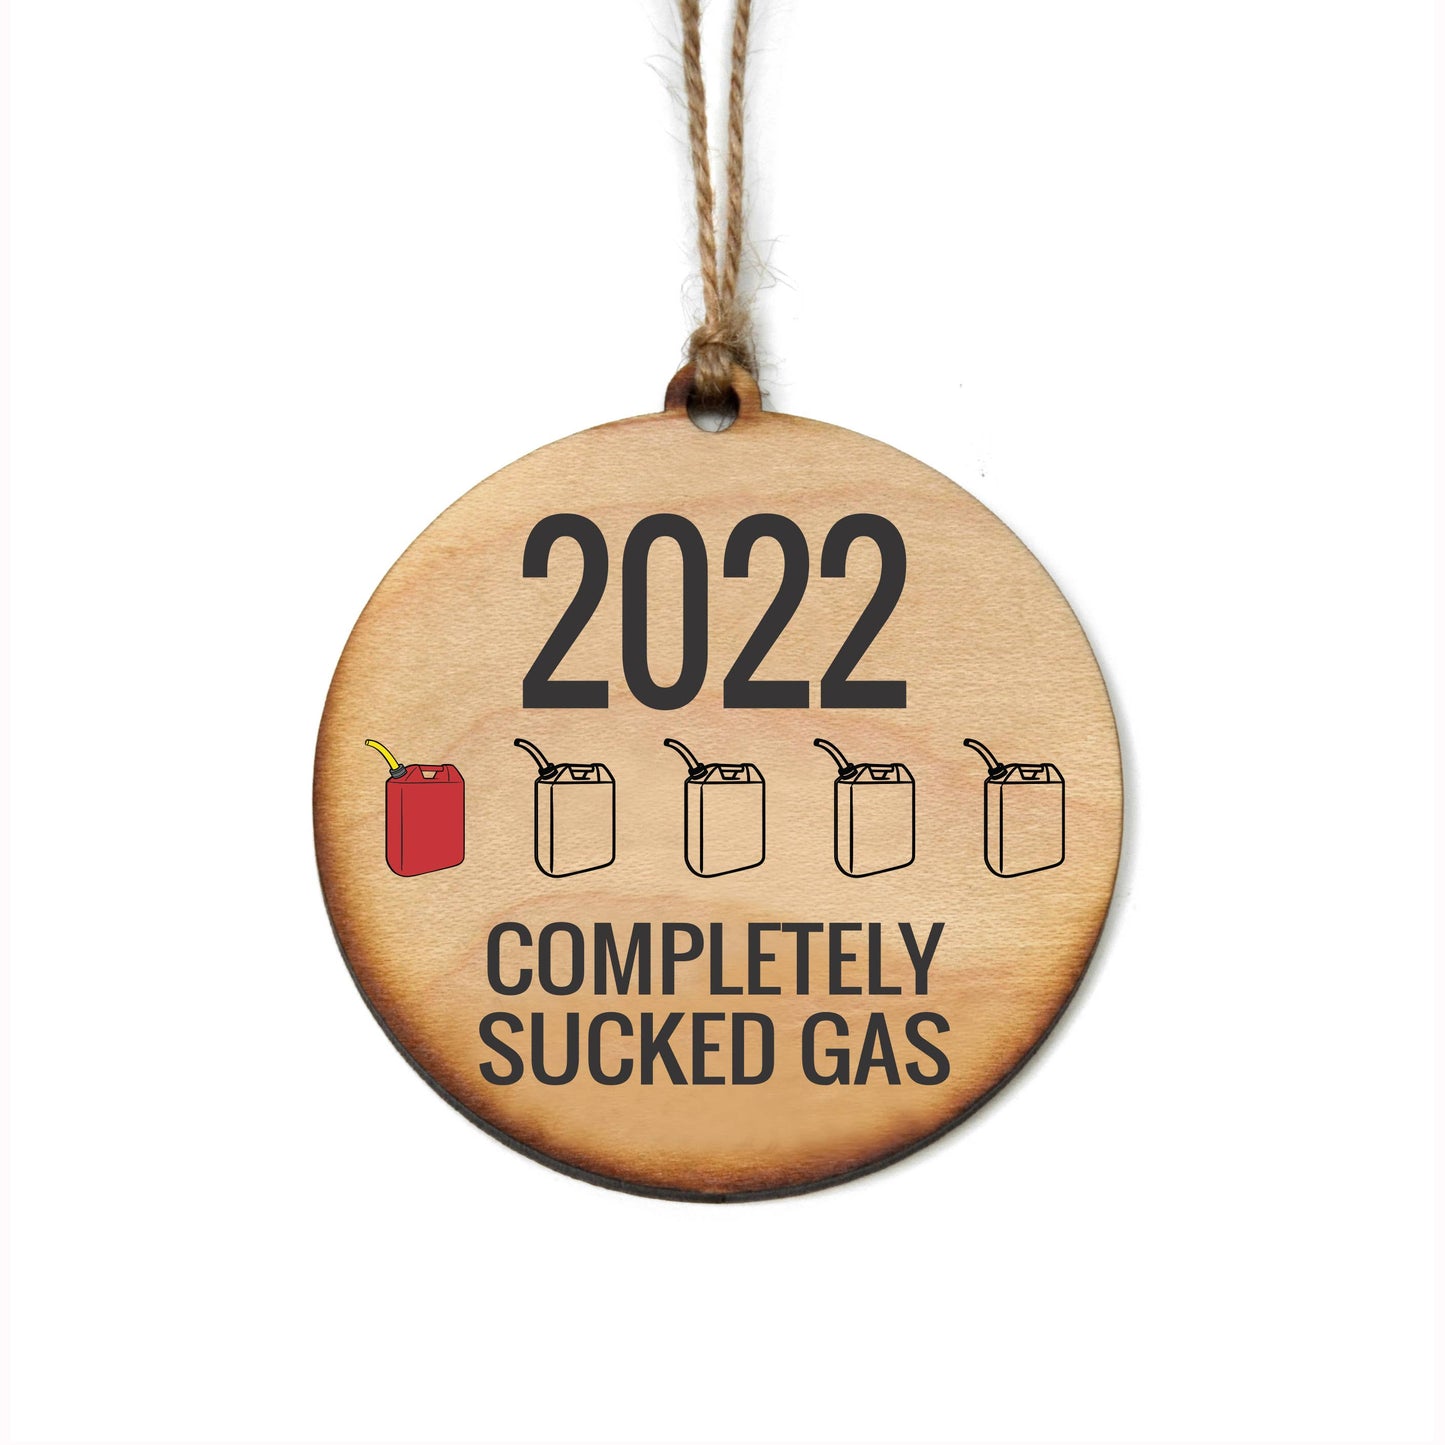 2022 Completely Sucked Gas Christmas Ornament